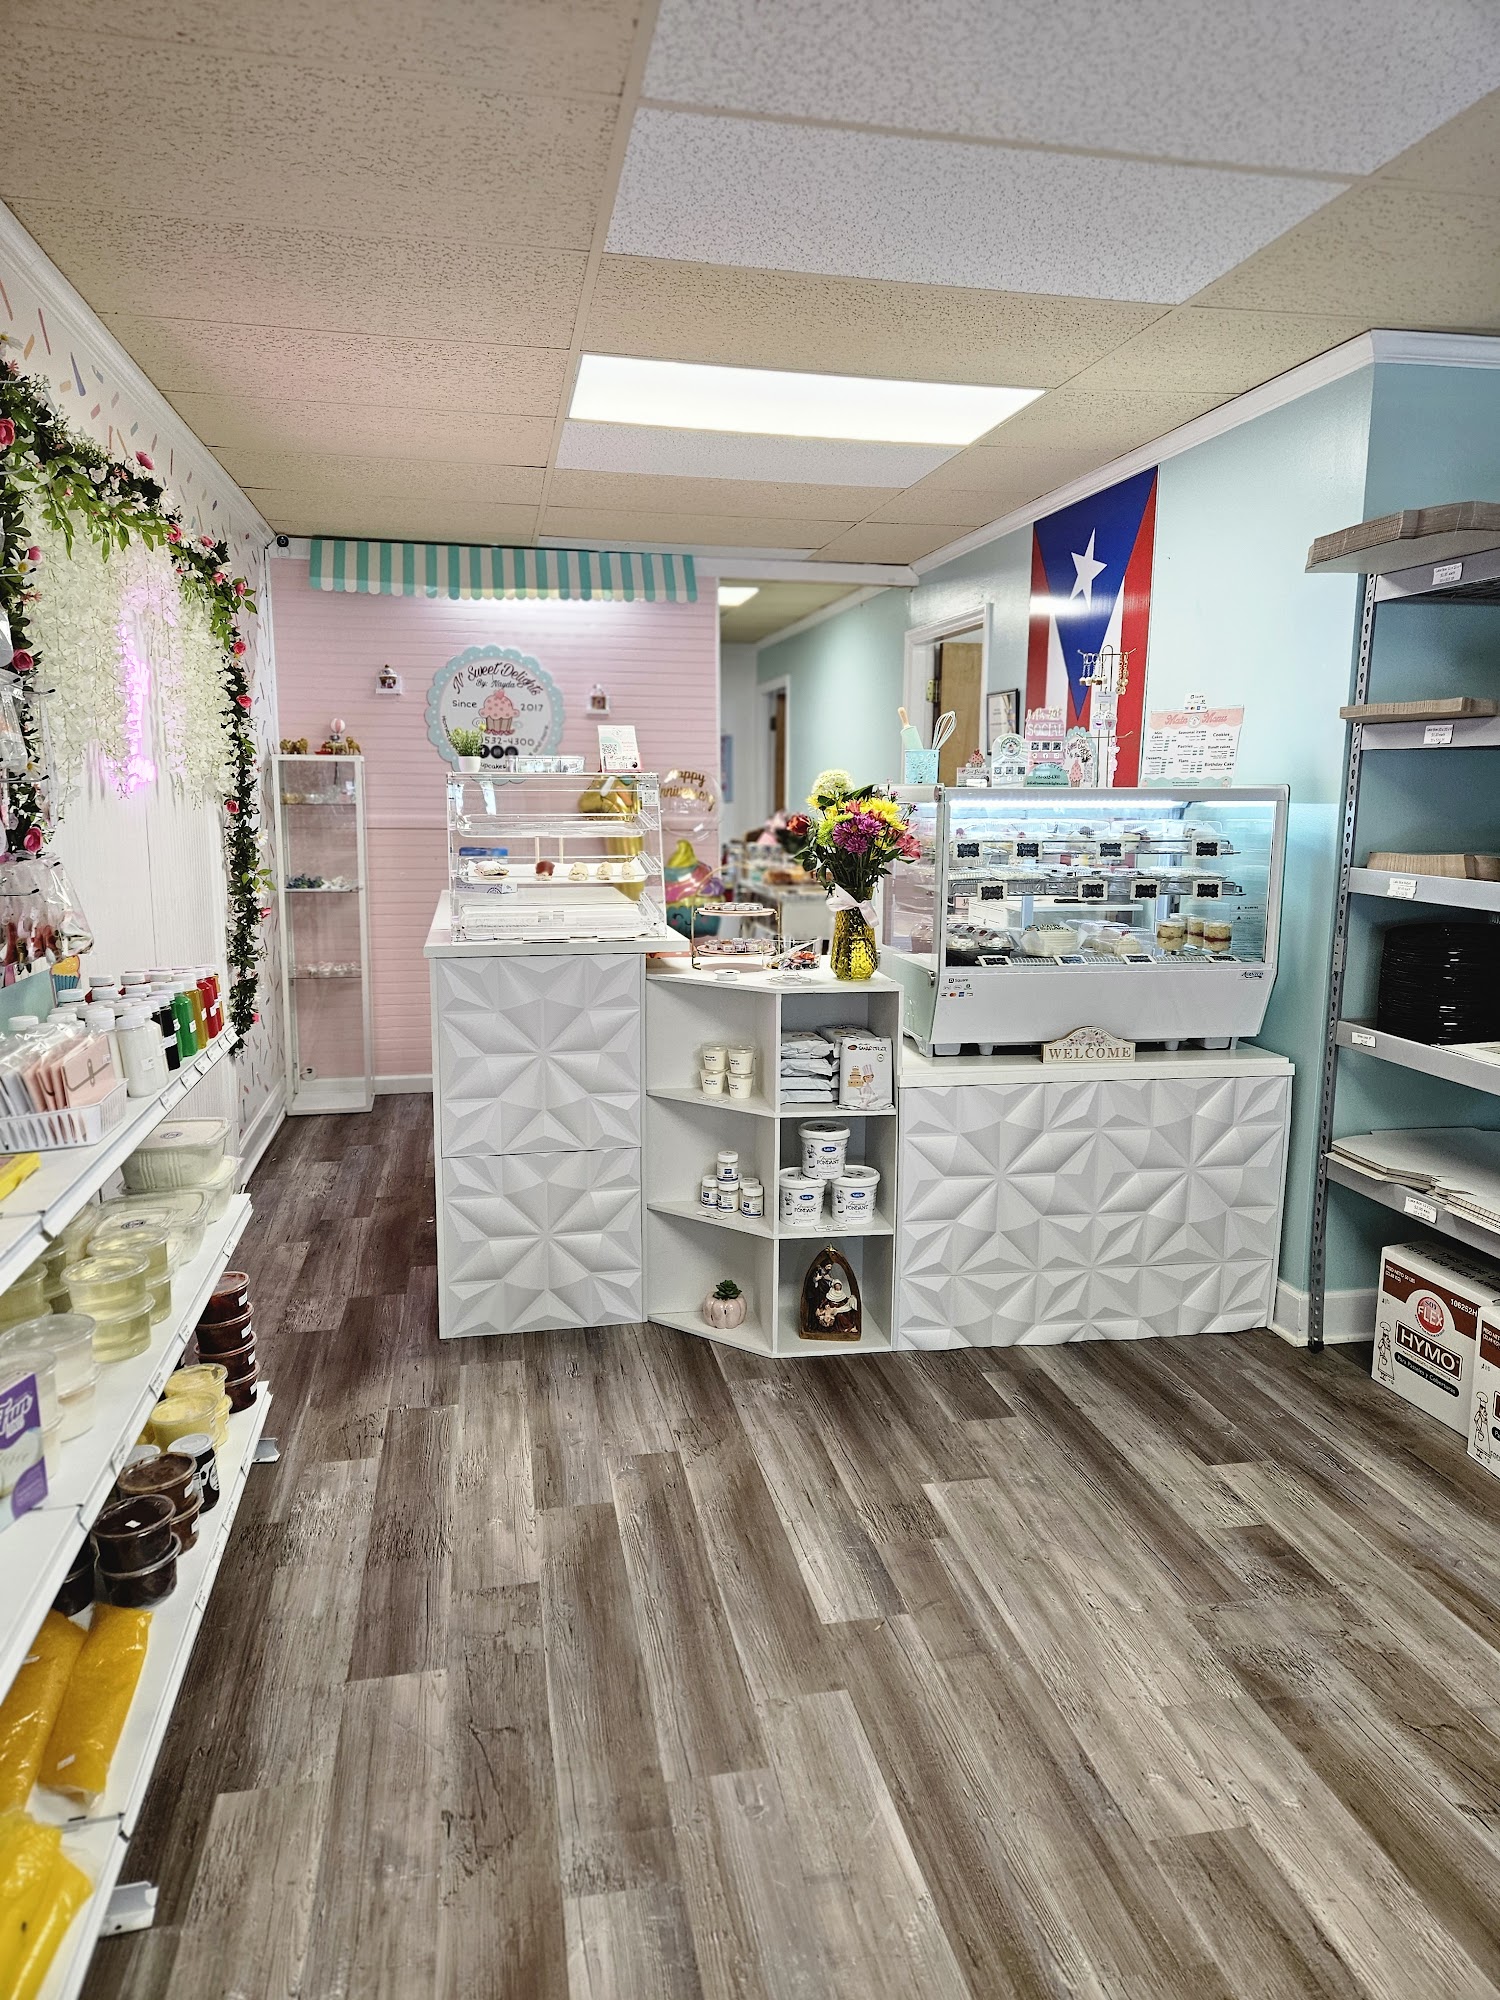 N' Sweet Delights Cake Decorating Supplies and Classes